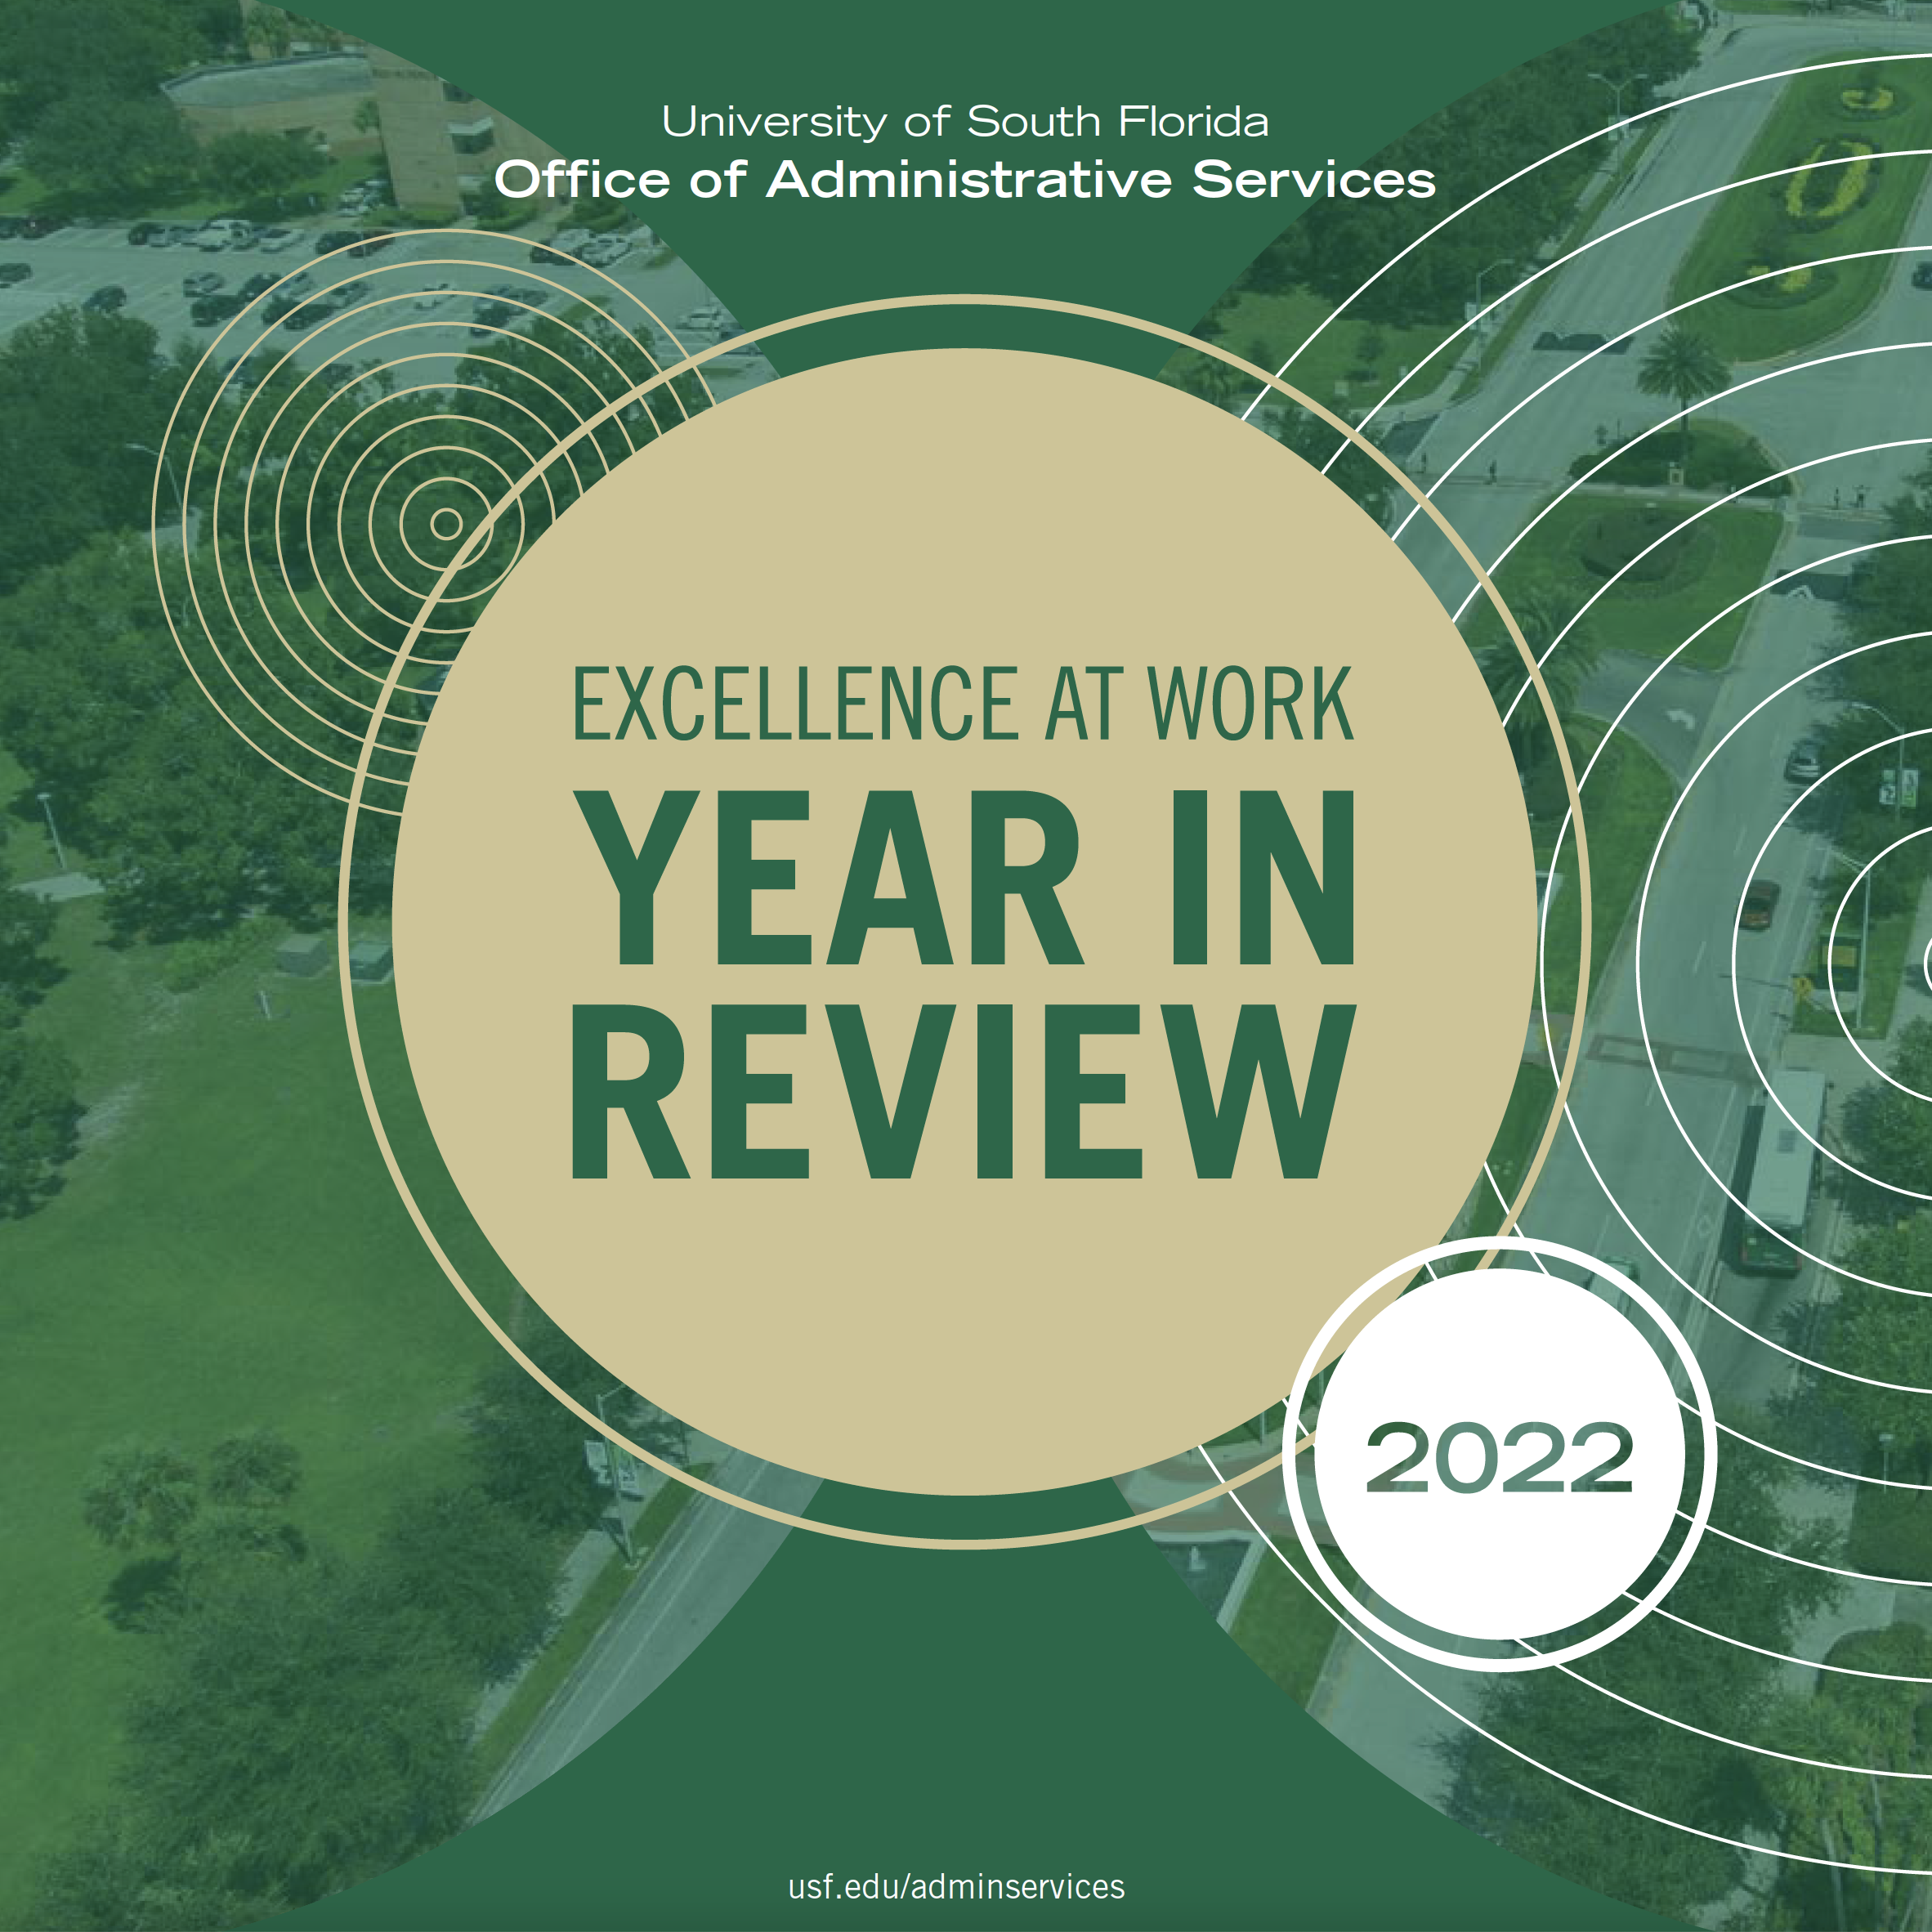 OAS year in review 2022